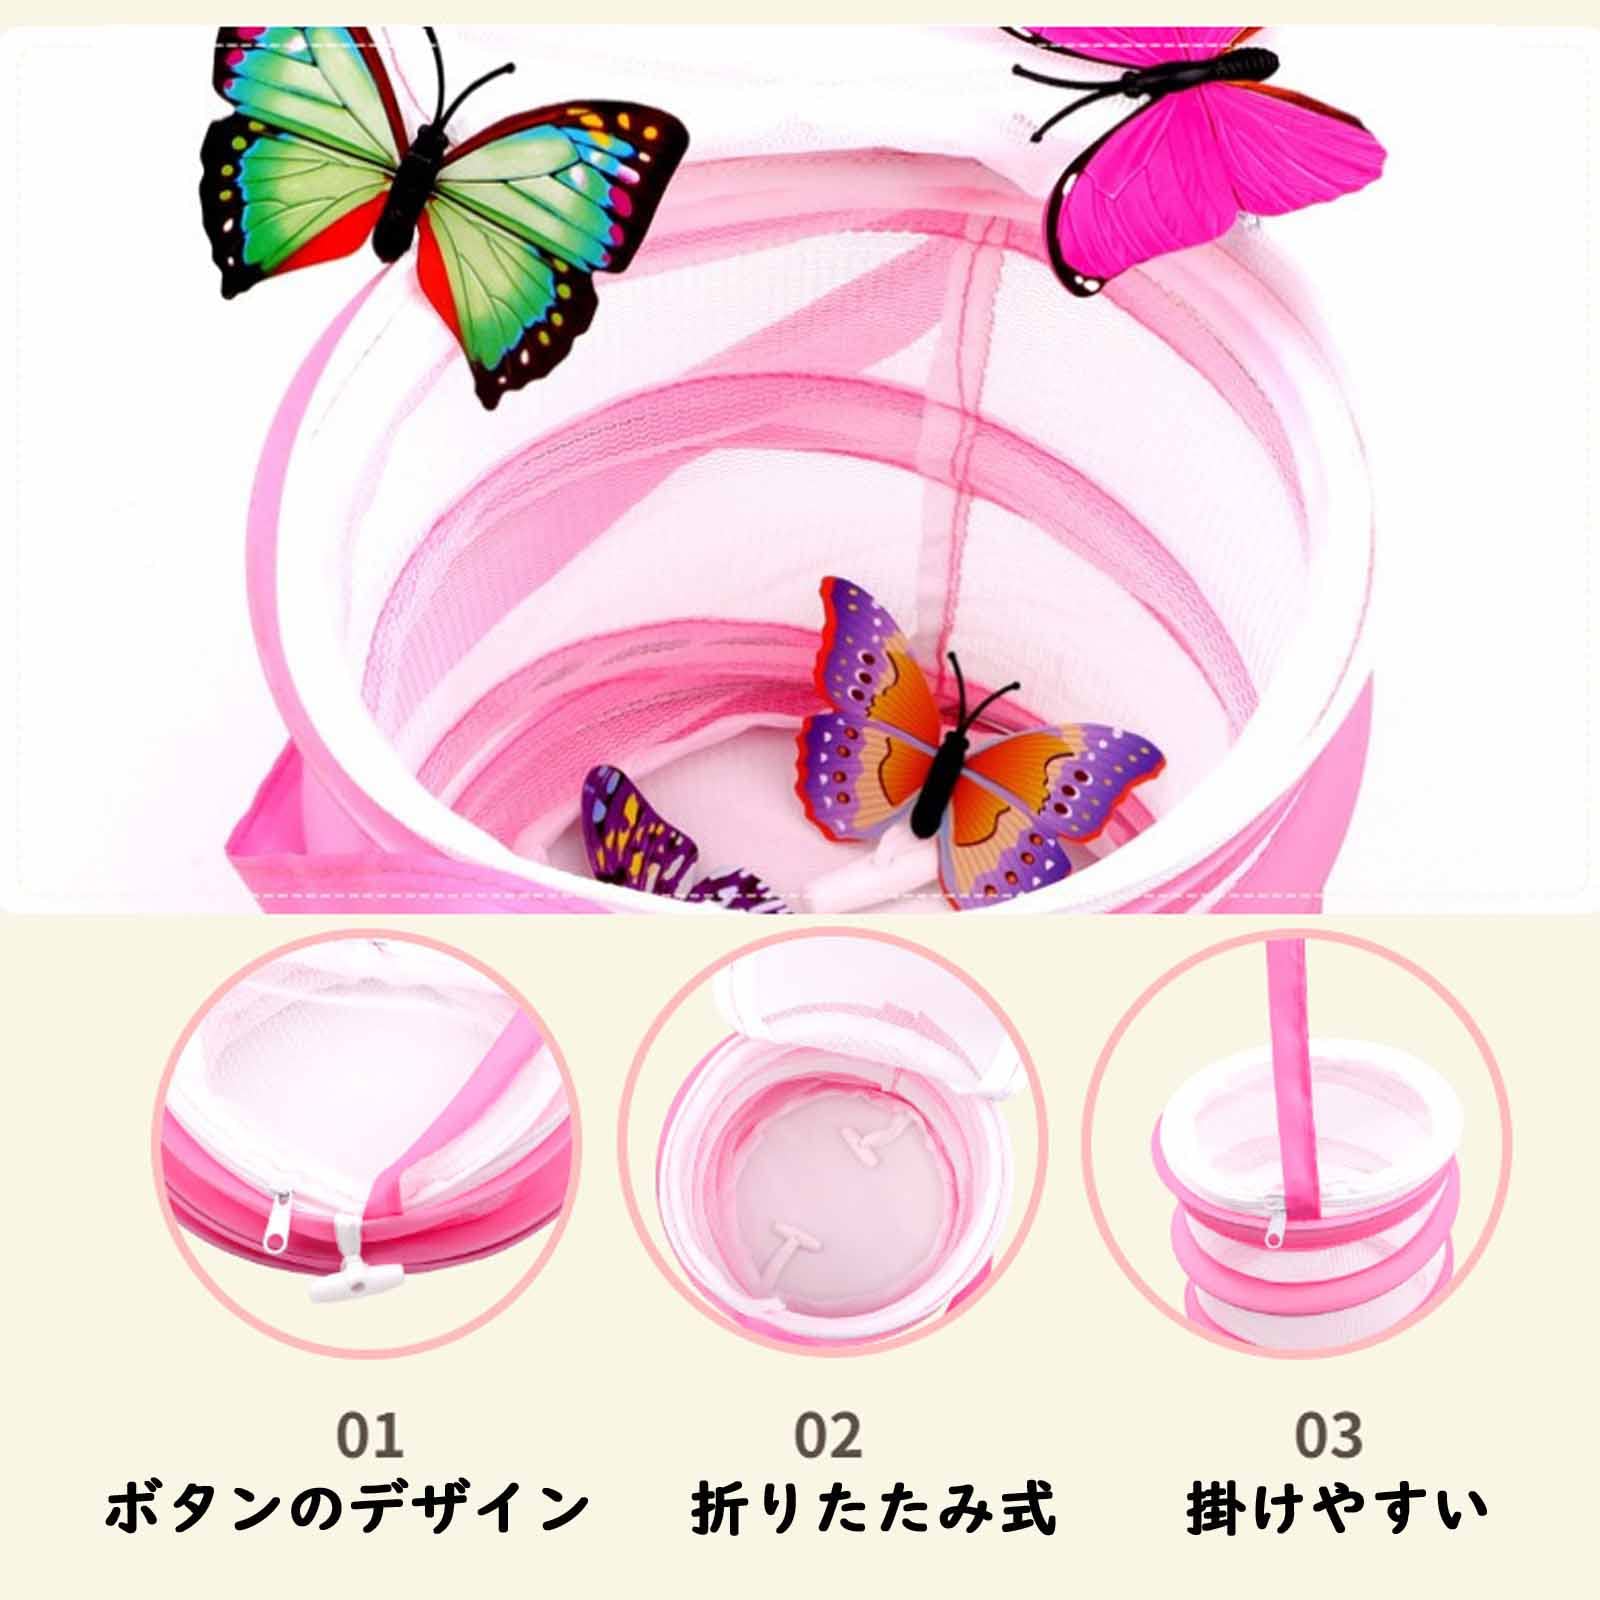 Hakona insect cage rhinoceros beetle larva breeding case small pink insect cage mesh string attaching light weight . robust insect cage folding stylish ventilation . insect 